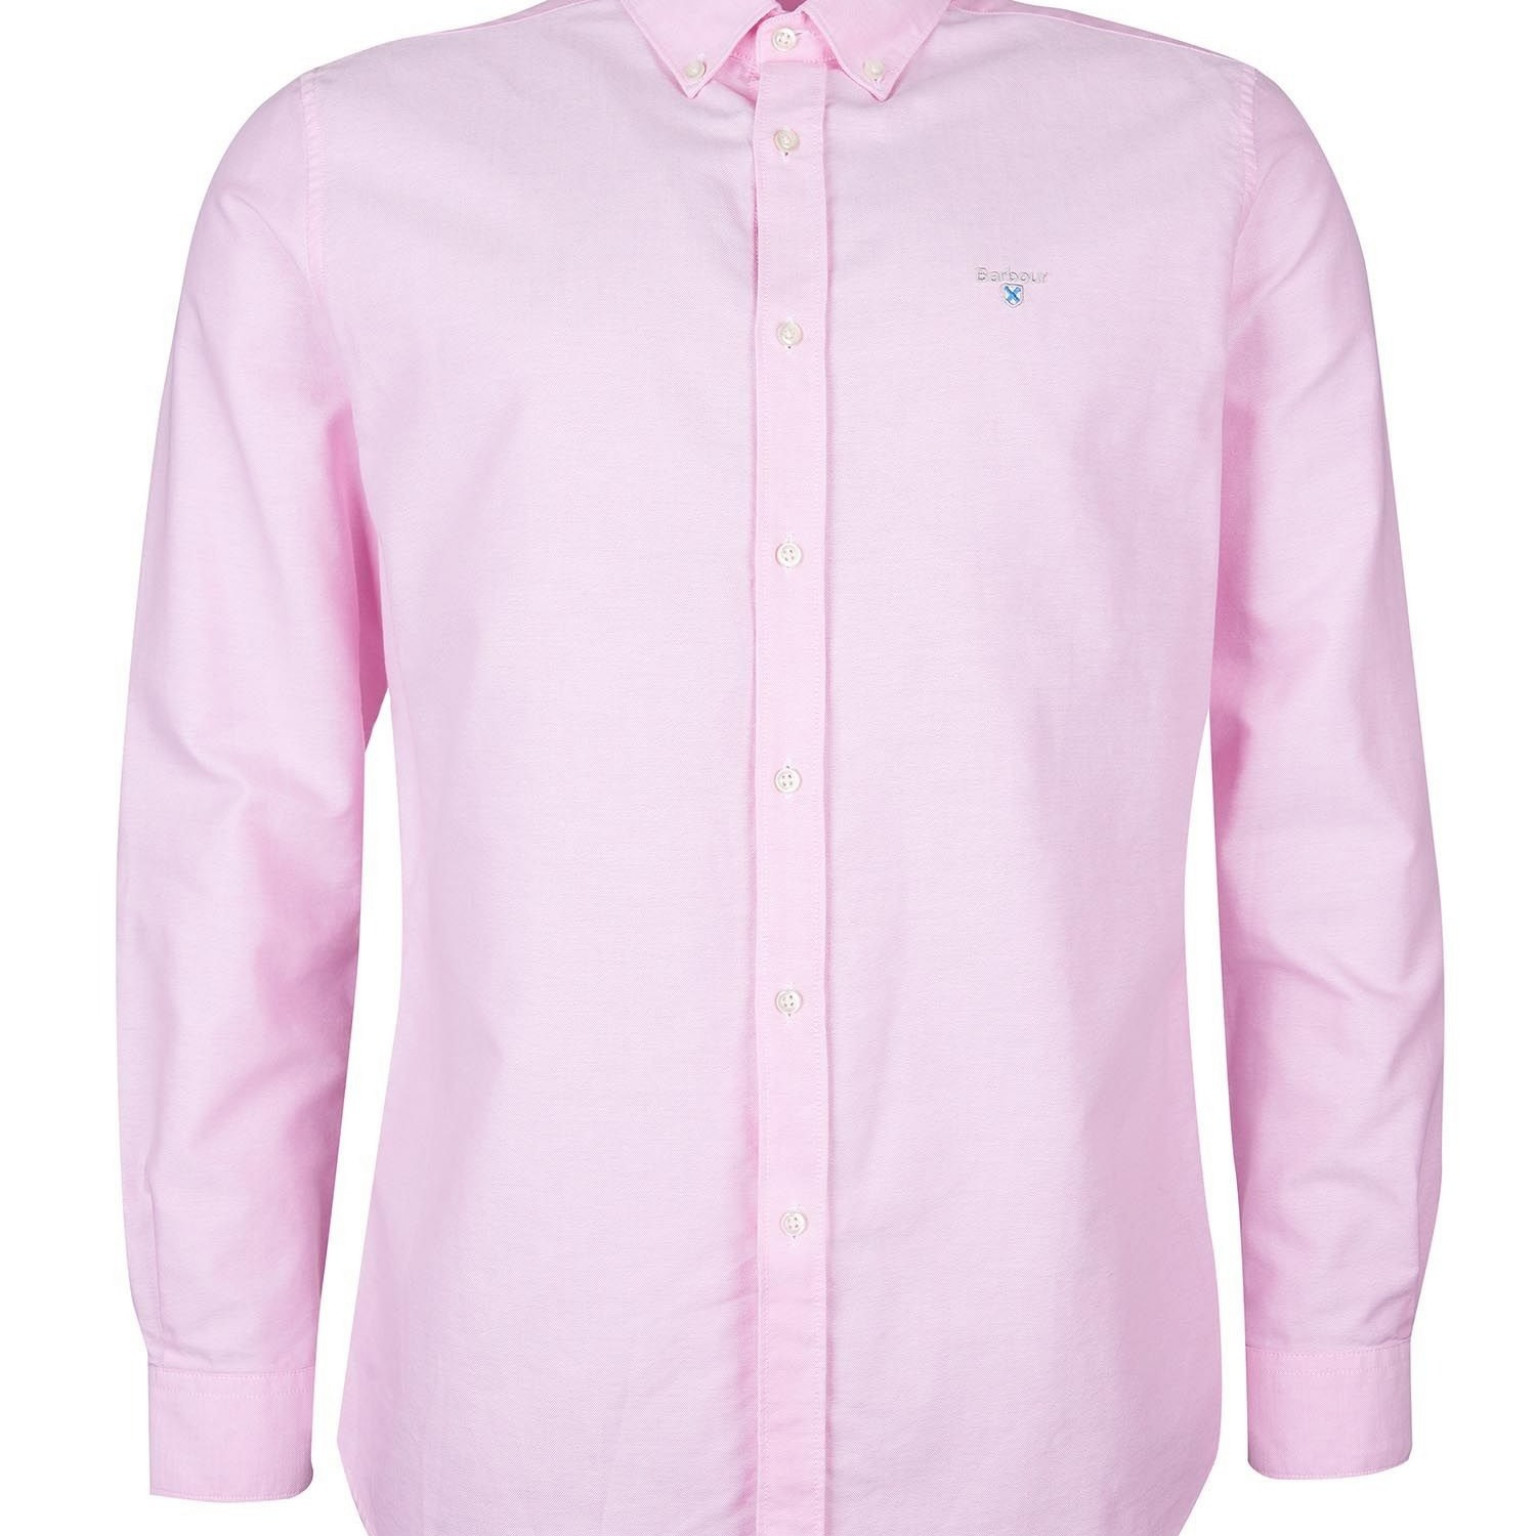 Barbour Oxford 3 Tailored Fit Pink